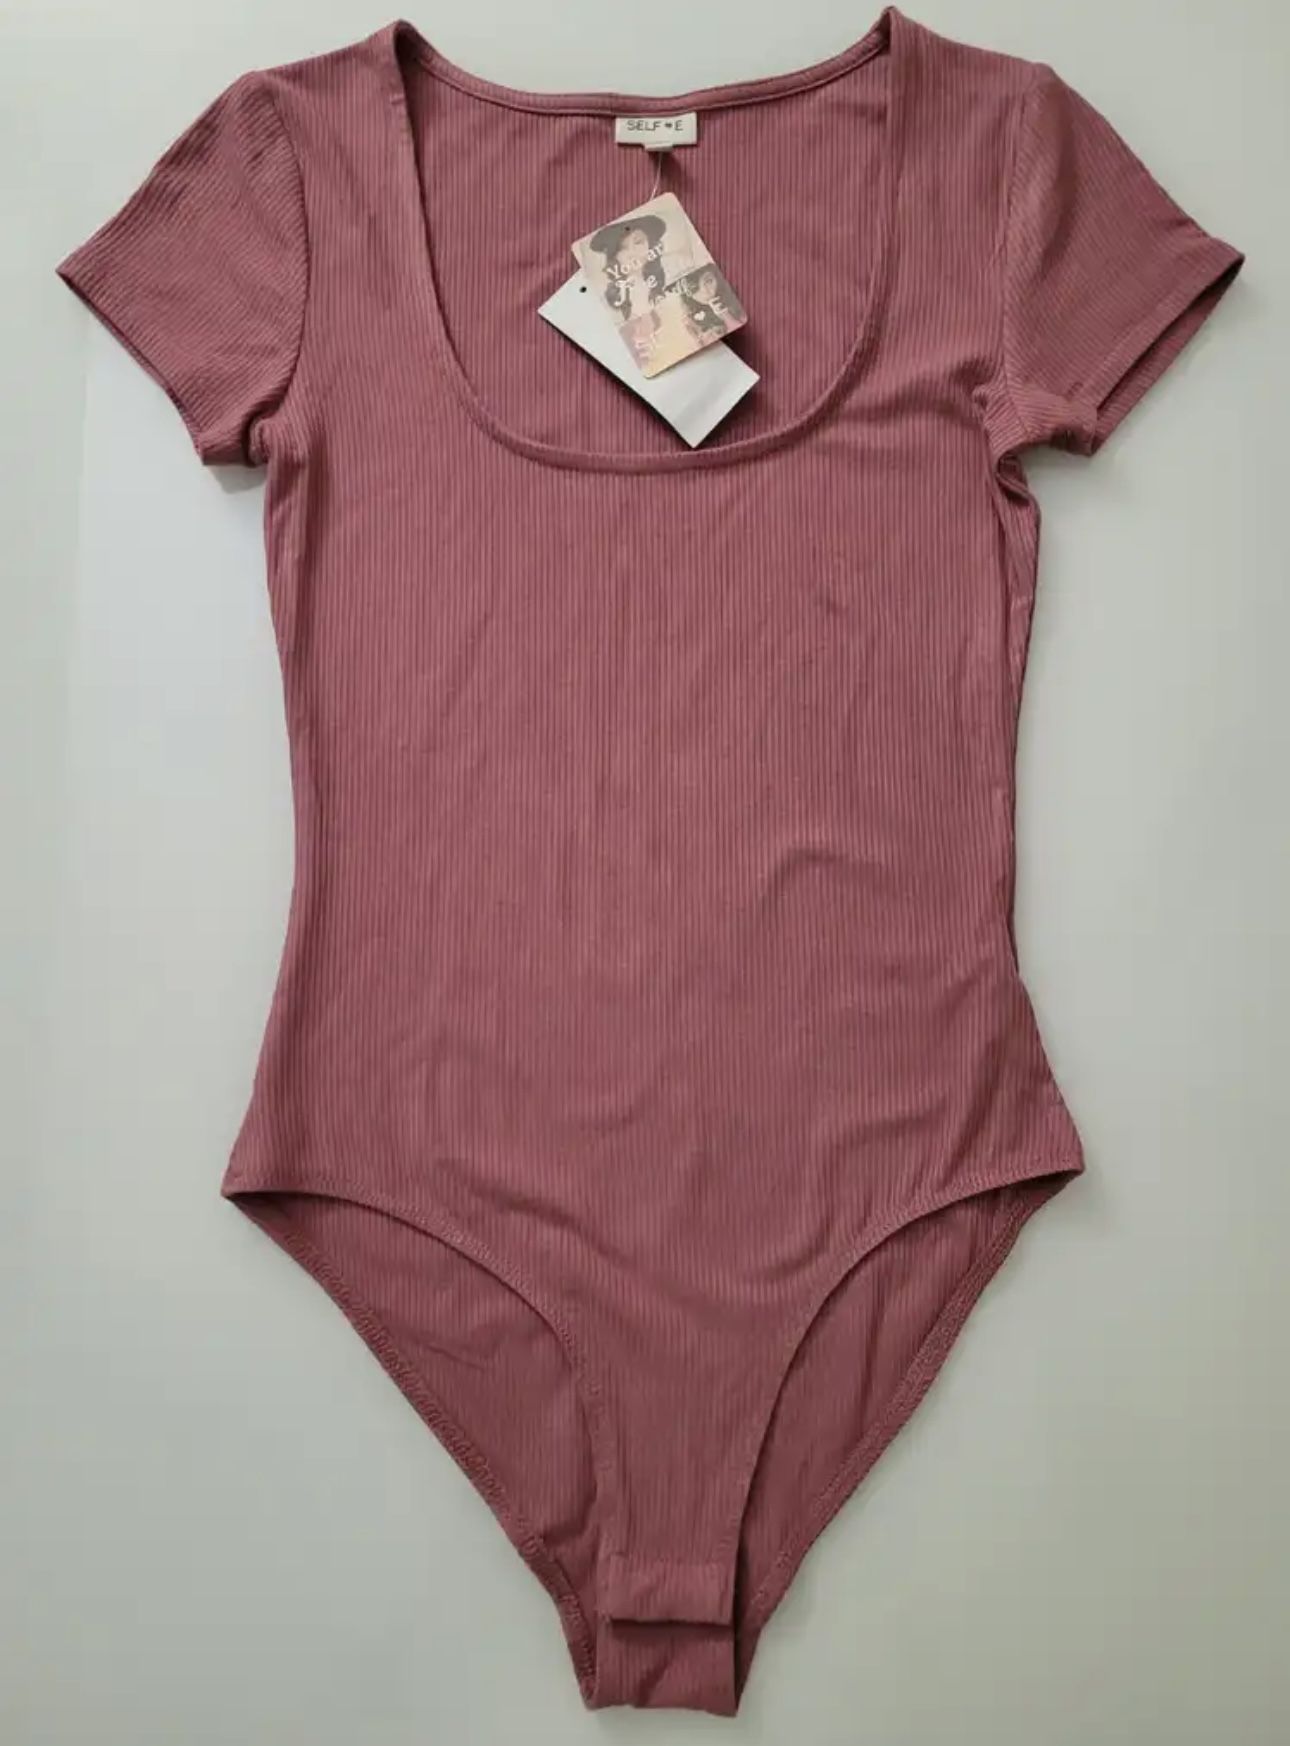 BRAND NEW With Tag, Rusty Rose Women's Short Sleeve Bodysuit Size XS, Self Loves E.